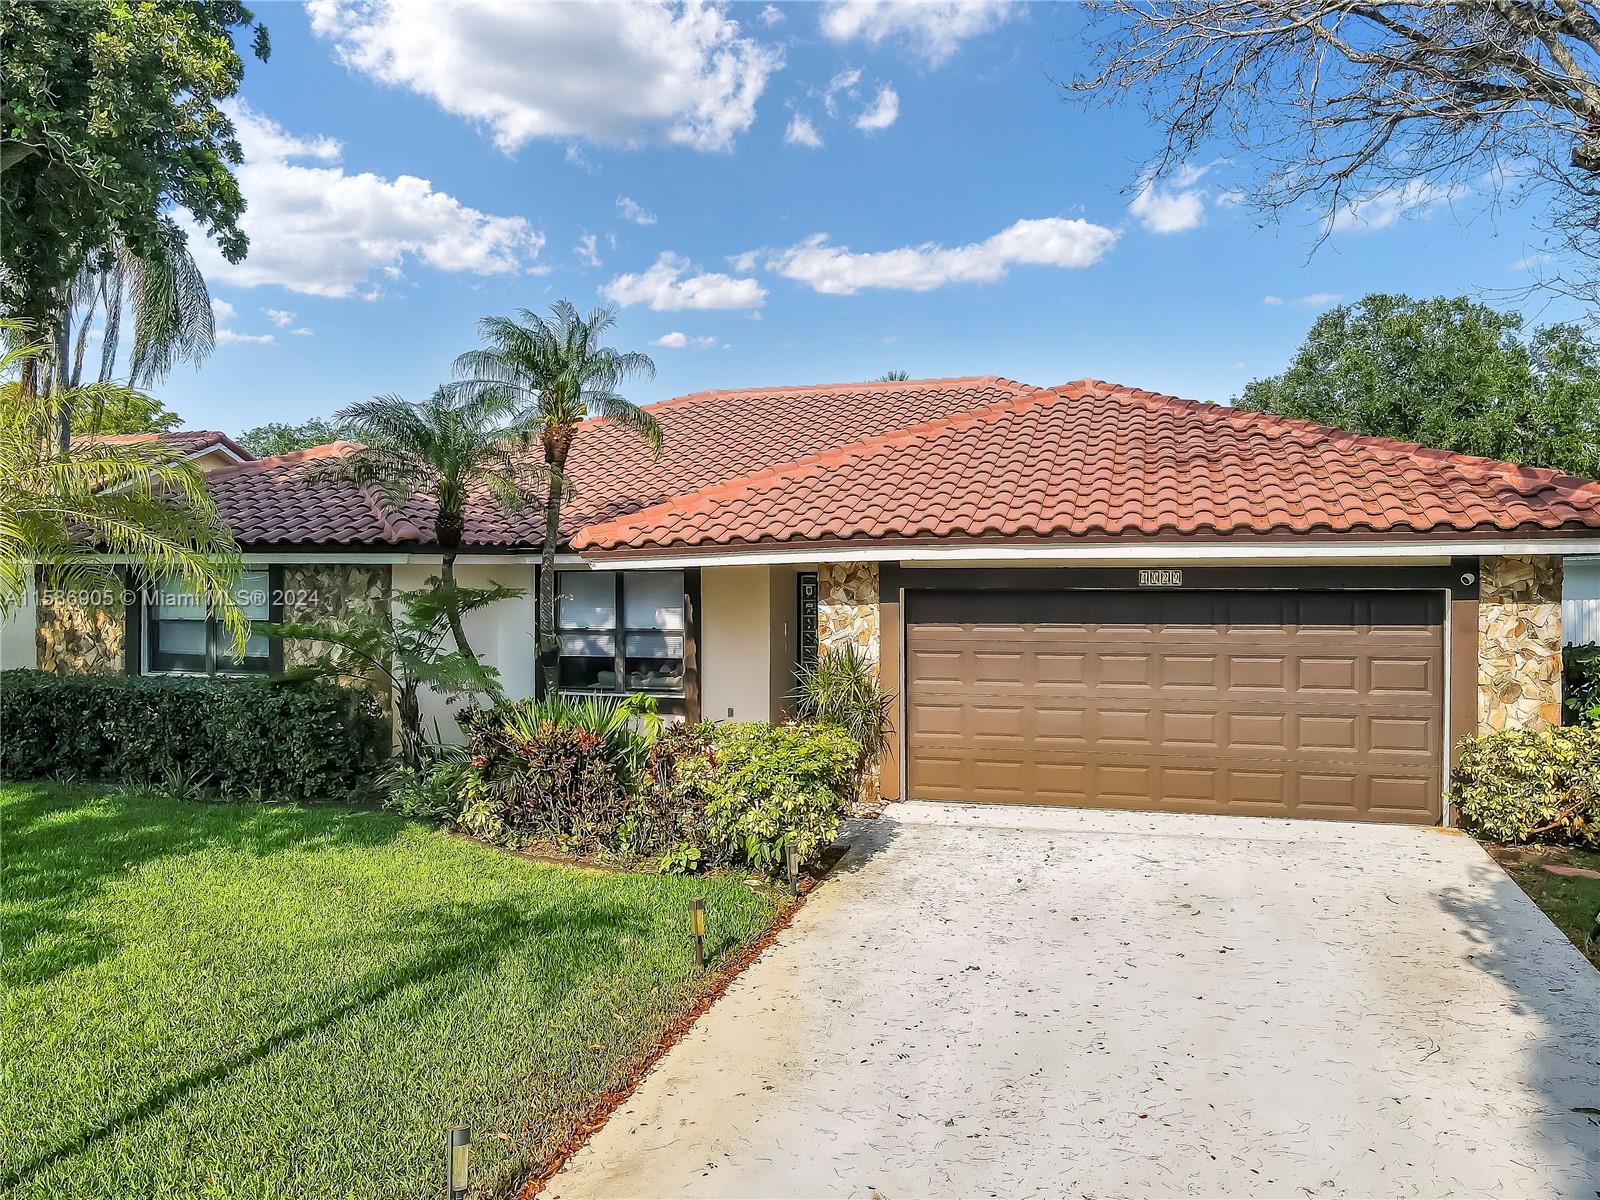 4029 Nw 72nd Ave, Coral Springs, Broward County, Florida - 4 Bedrooms  
2 Bathrooms - 